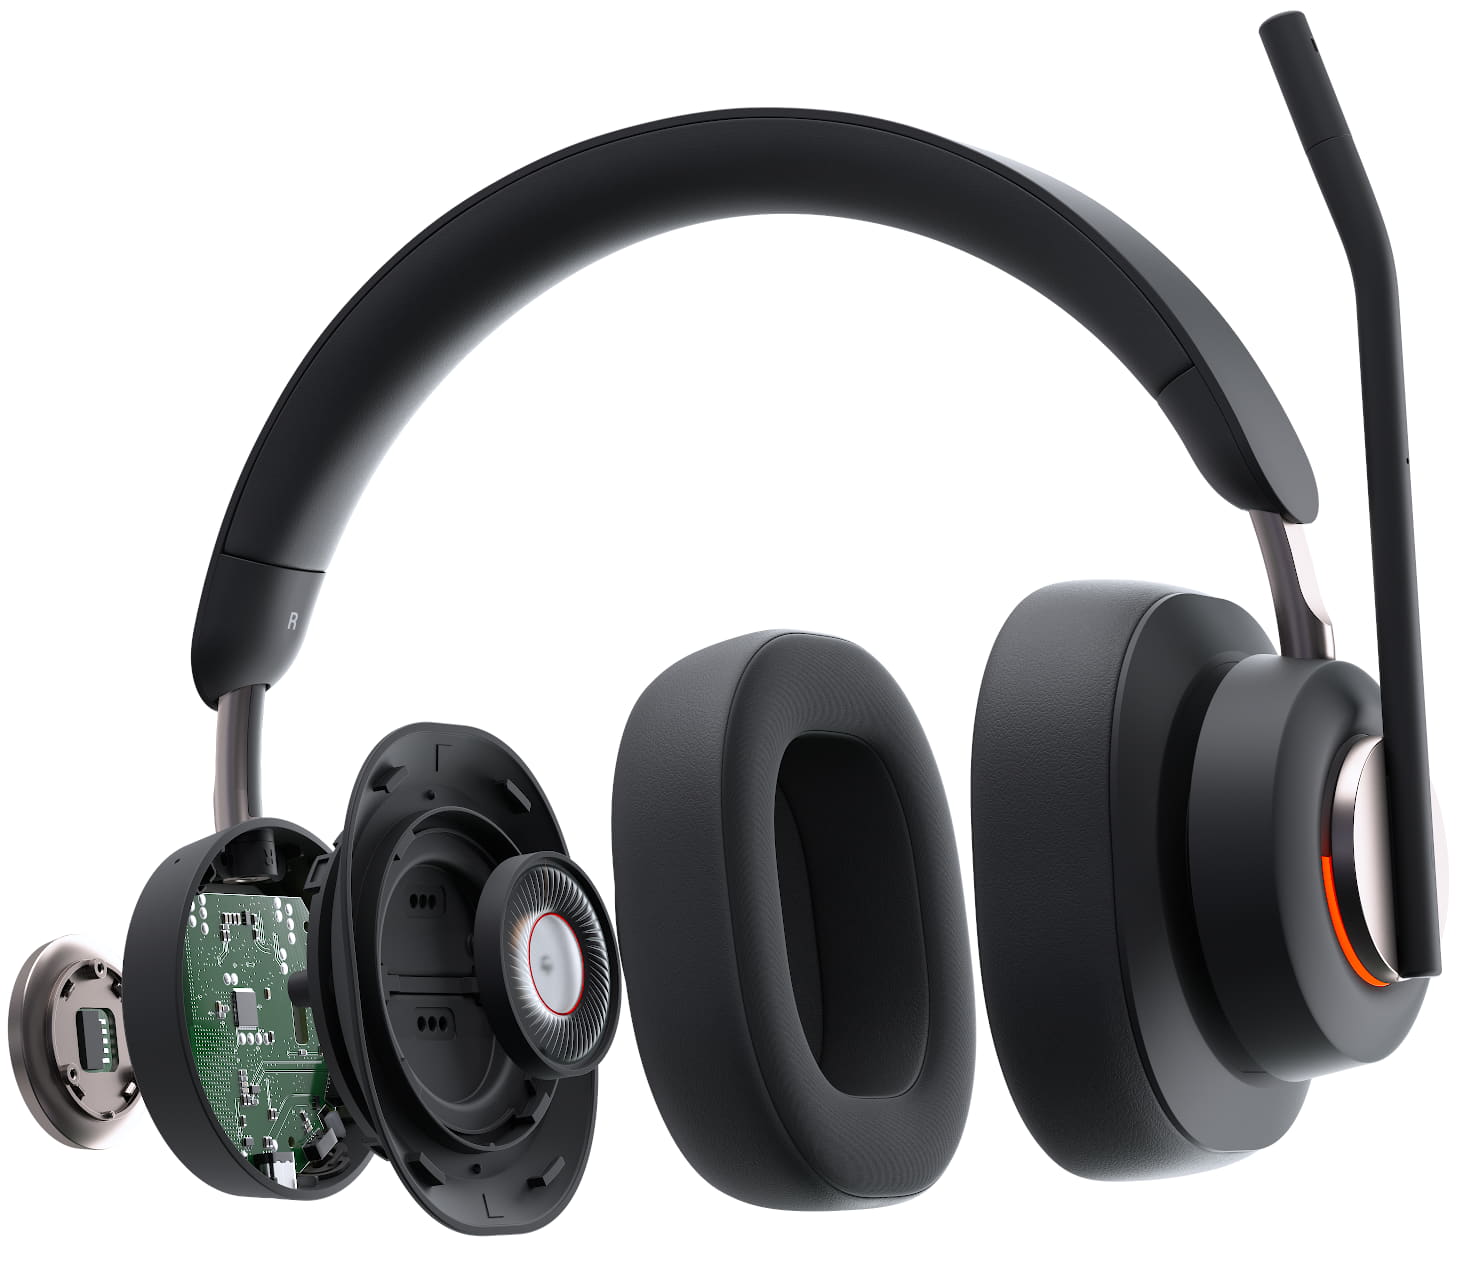 Full exploded view of Kensington H3000 Bluetooth Over-Ear Headset showing  AI-powered environmental noise-cancelling technology, passive noise-cancellation technology,and 40mm neodymium drivers
                                    